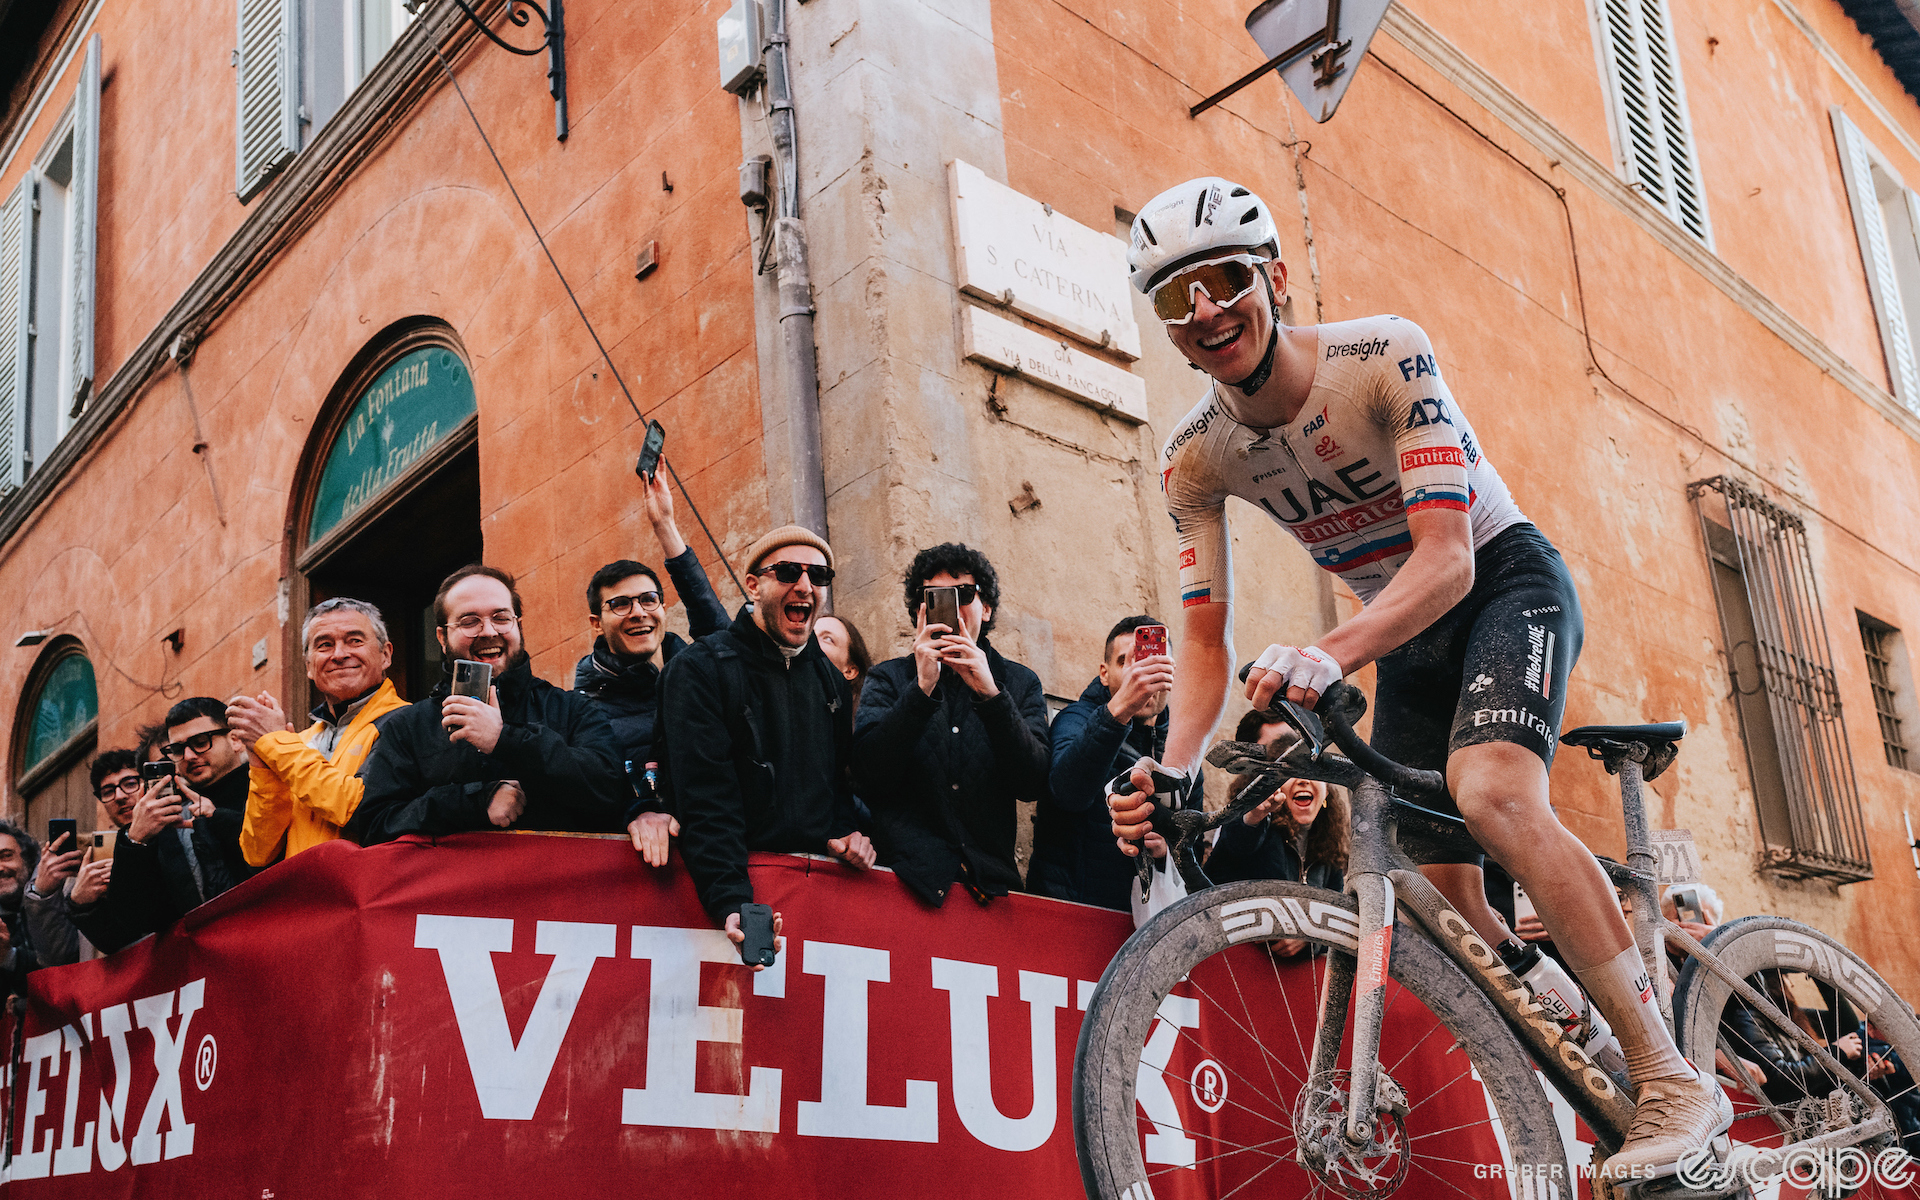 Tadej Pogačar crests the top of the Via Santa Caterina climb into Siena at the 2024 Strade Bianche. He is mugging for the camera, facing the photographer and looking down at the lens with a wide, ebullient grin. Behind him, fans respond in kind, with big smiles and cheers as they applaud.